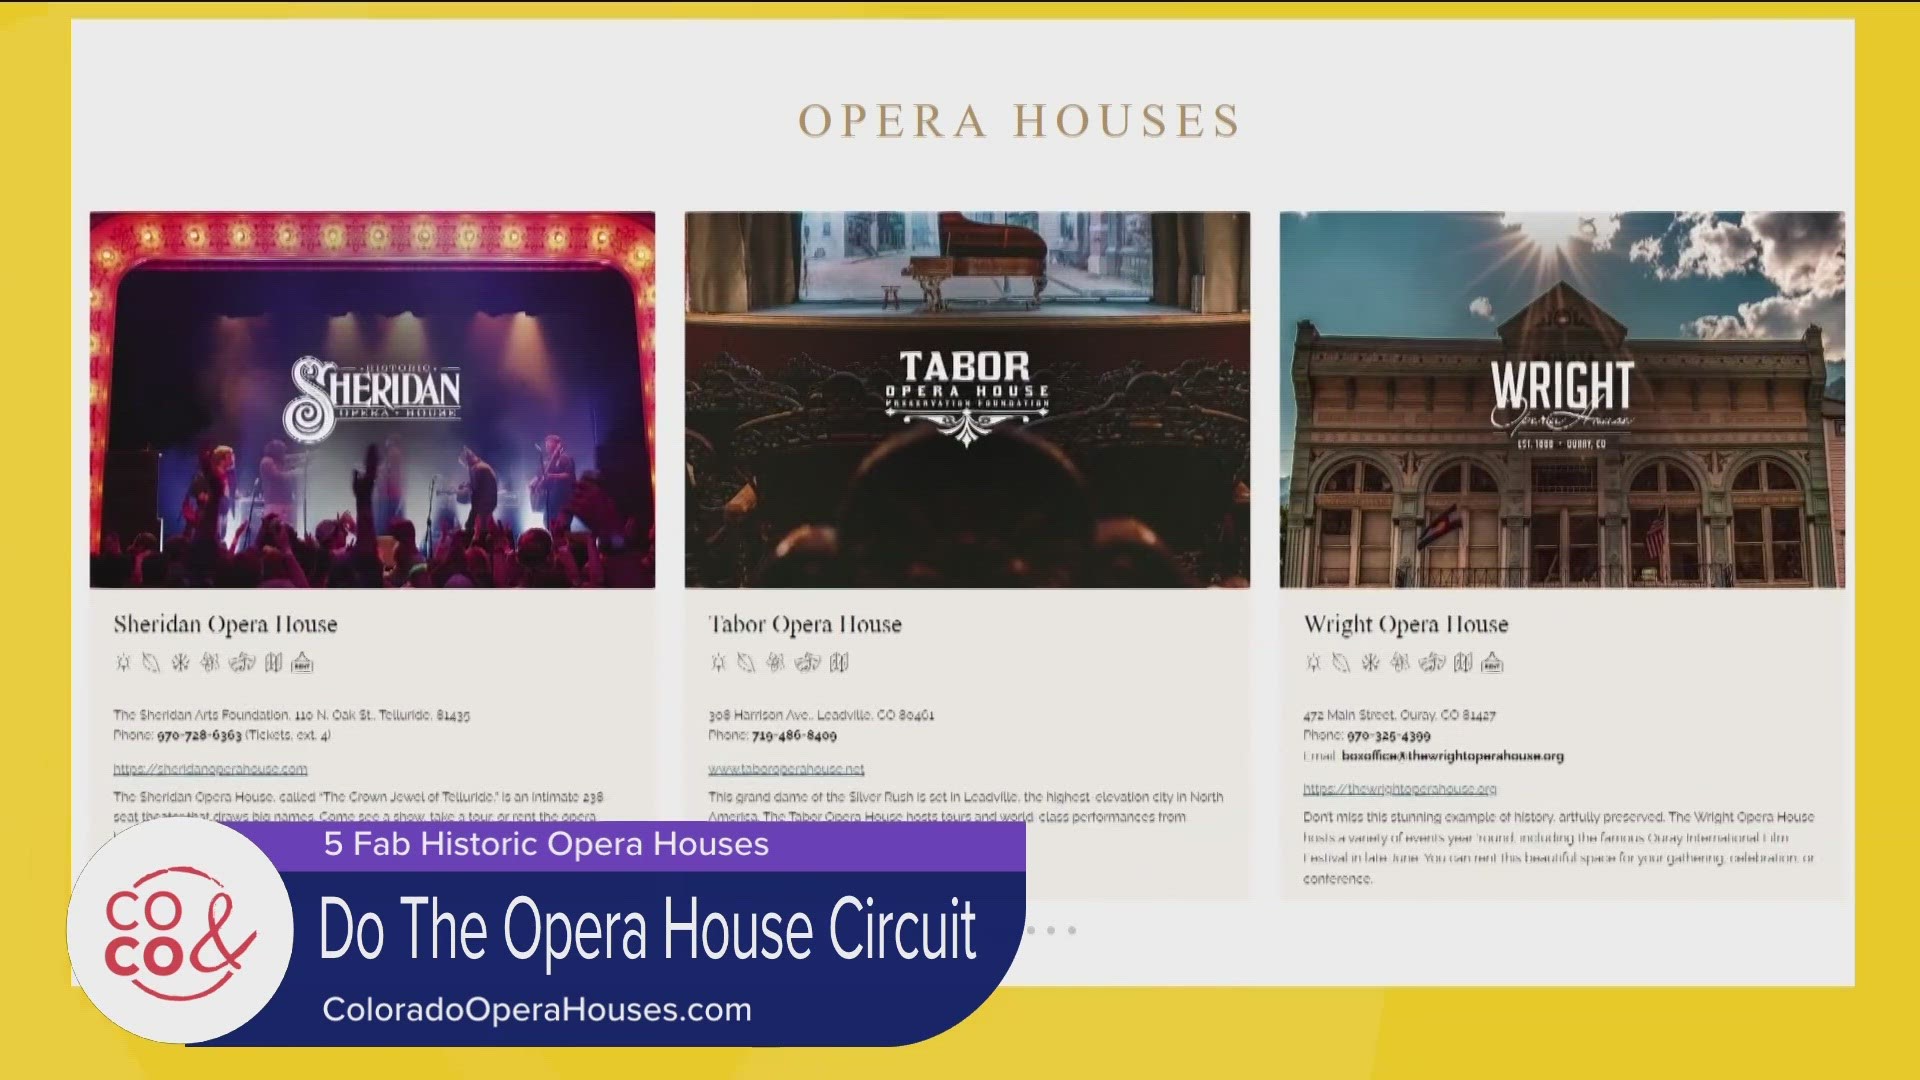 Visit Colorado's historic opera houses this summer! Find details and plan your trip at ColoradoOperaHouses.com. Follow Tomeka on Insta @TravelInStyleWithTomeka.